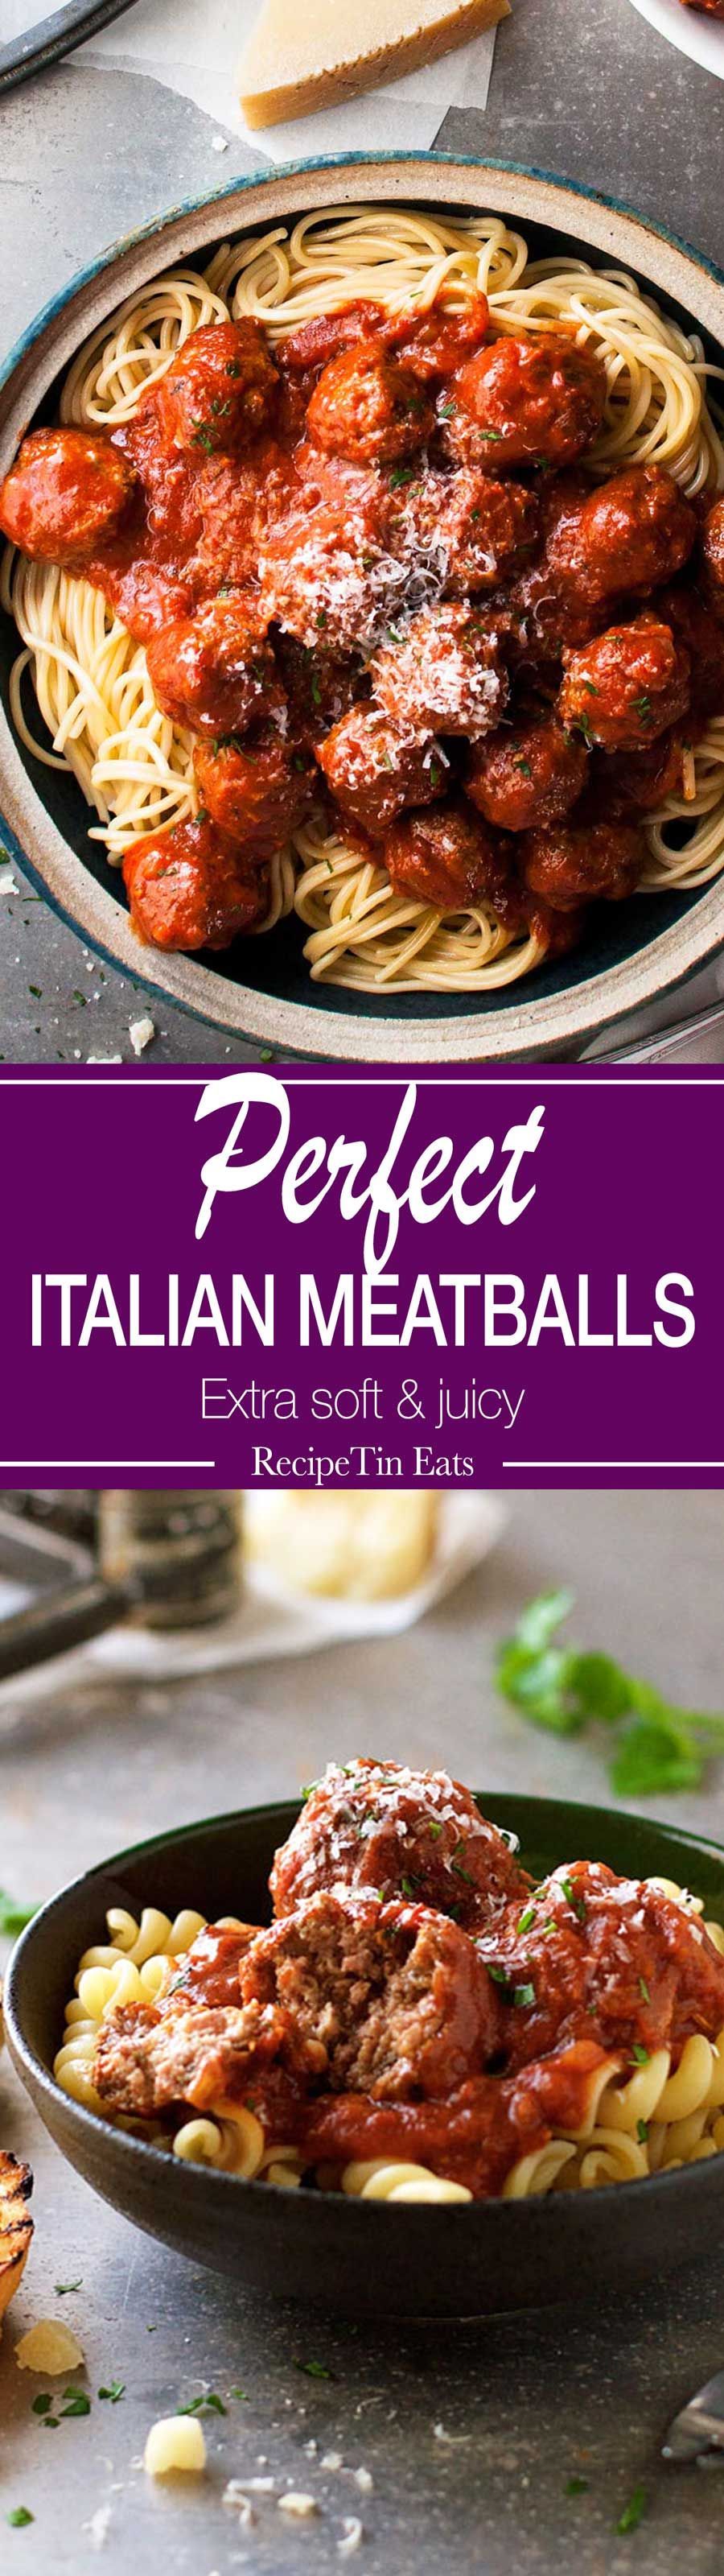 This recipe totally lives up to its promises. The ONLY meatball recipe I will ever use from now on!!!